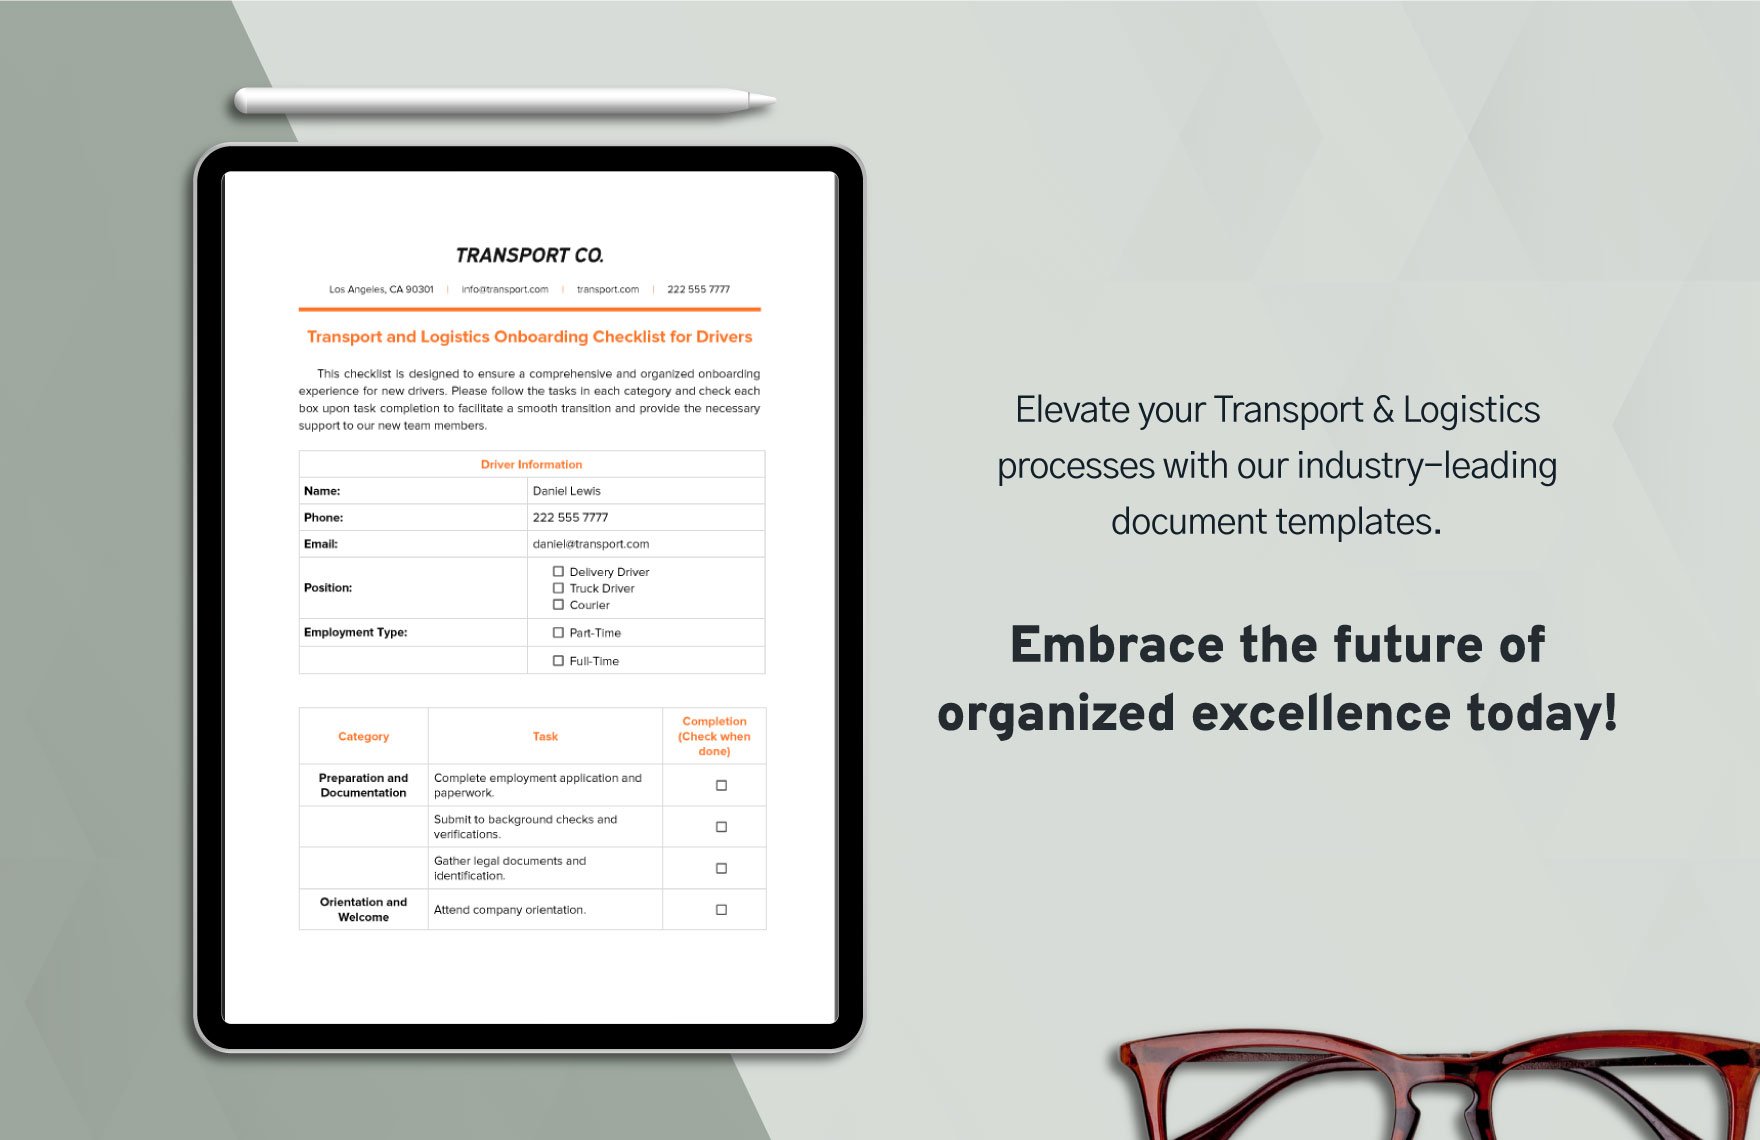 Transport and Logistics Onboarding Checklist for Drivers Template